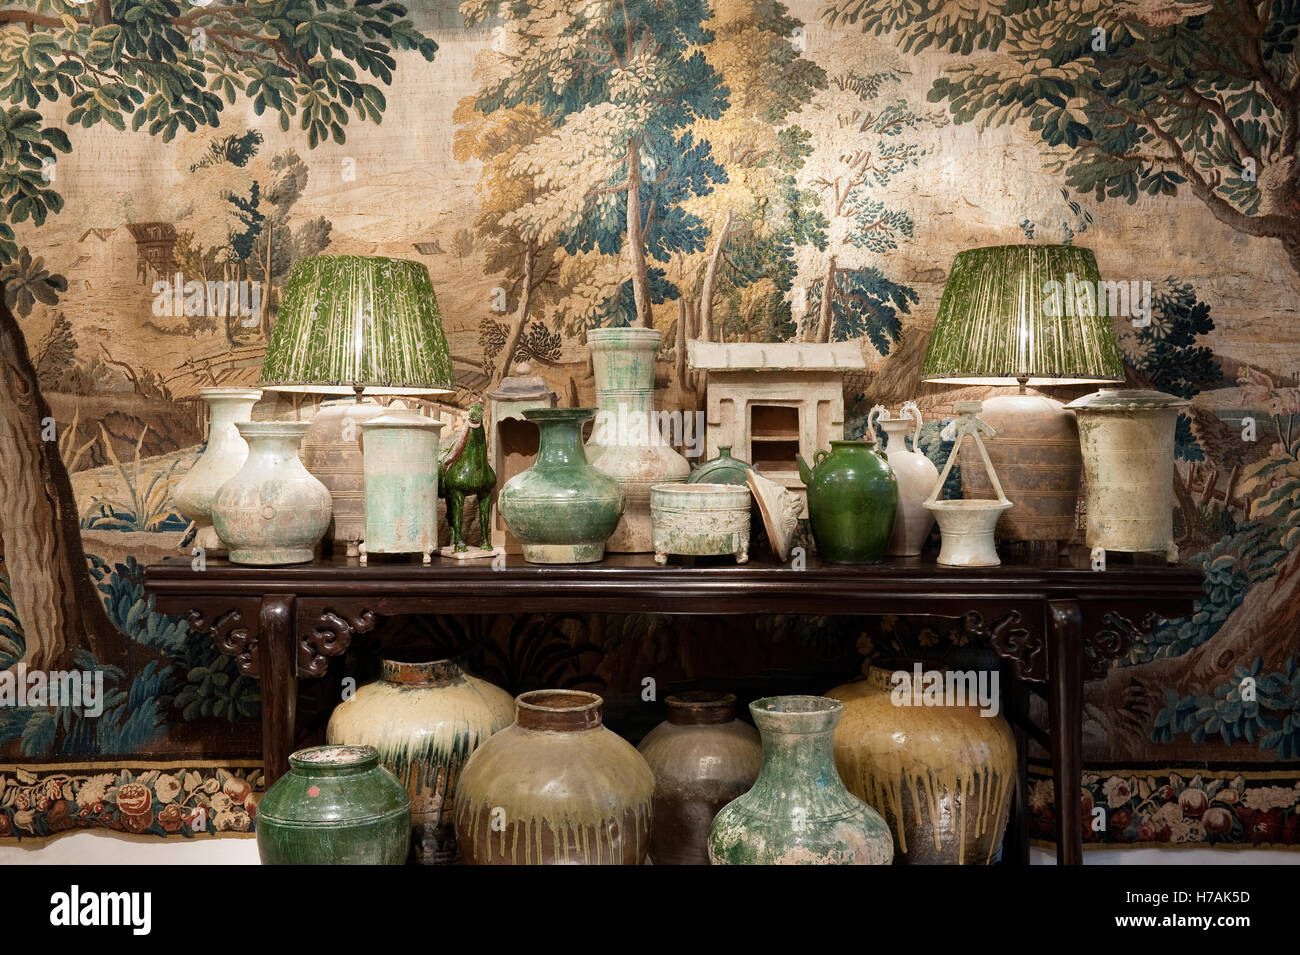 Chinese Han Dynasty green glazed pottery Baluster vases on console table with tapestry backdrop Guinevere's antique shop Stock Photo